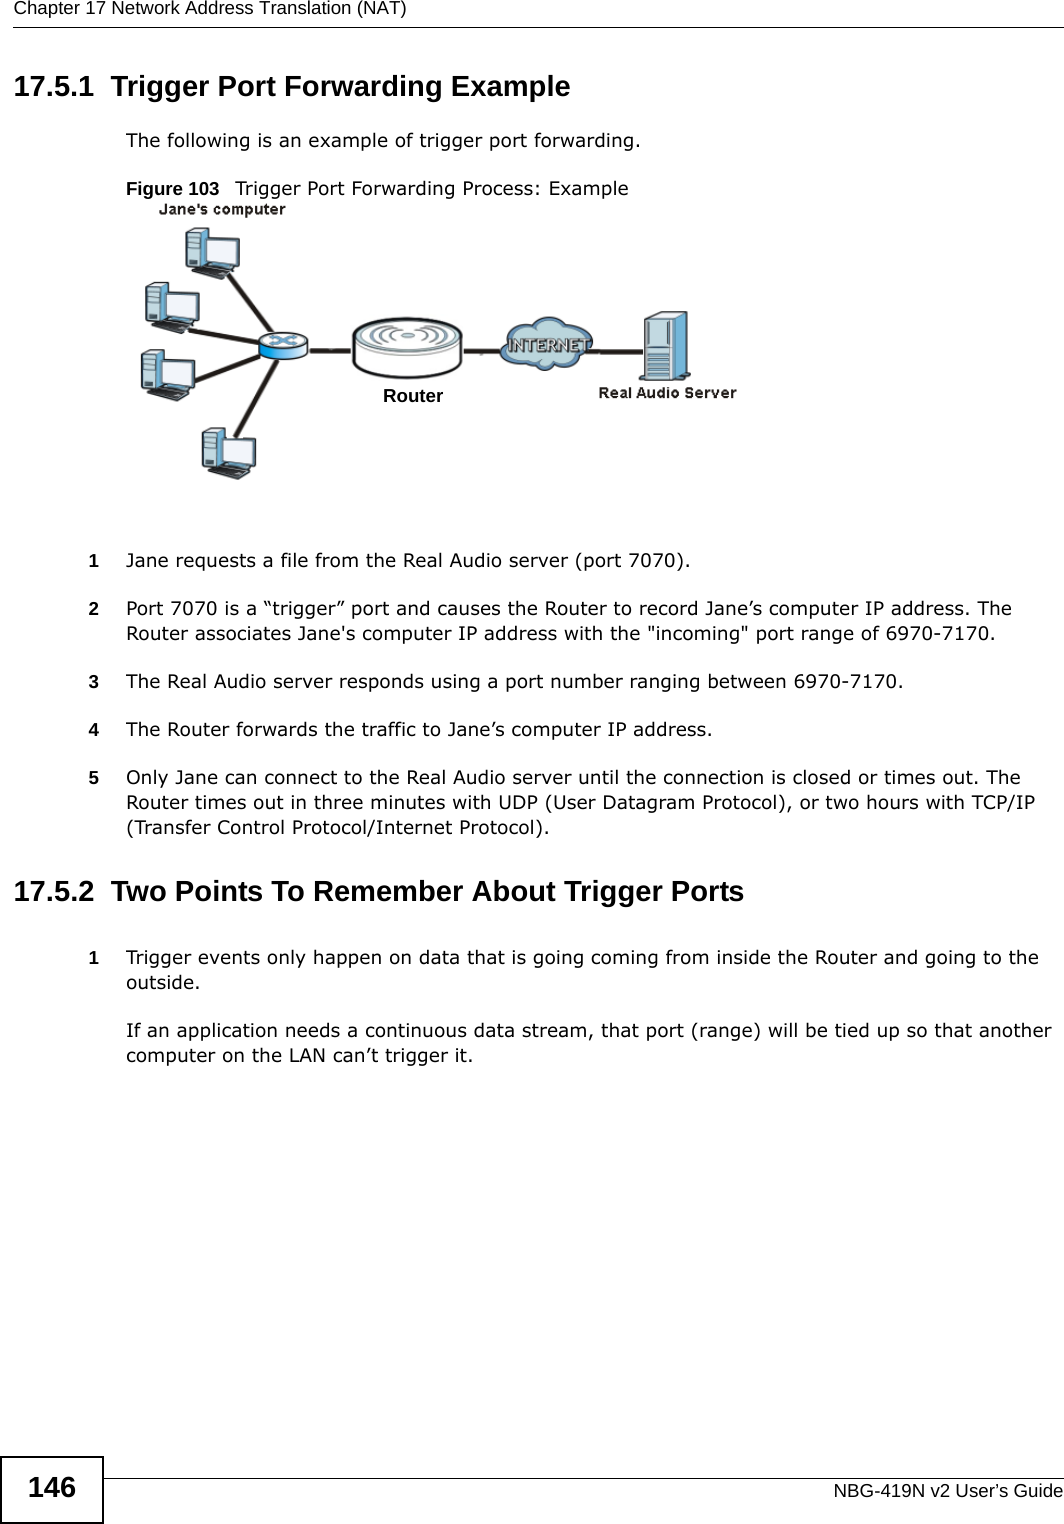 Chapter 17 Network Address Translation (NAT)NBG-419N v2 User’s Guide14617.5.1  Trigger Port Forwarding Example The following is an example of trigger port forwarding.Figure 103   Trigger Port Forwarding Process: Example1Jane requests a file from the Real Audio server (port 7070).2Port 7070 is a “trigger” port and causes the Router to record Jane’s computer IP address. The Router associates Jane&apos;s computer IP address with the &quot;incoming&quot; port range of 6970-7170.3The Real Audio server responds using a port number ranging between 6970-7170.4The Router forwards the traffic to Jane’s computer IP address. 5Only Jane can connect to the Real Audio server until the connection is closed or times out. The Router times out in three minutes with UDP (User Datagram Protocol), or two hours with TCP/IP (Transfer Control Protocol/Internet Protocol). 17.5.2  Two Points To Remember About Trigger Ports1Trigger events only happen on data that is going coming from inside the Router and going to the outside.If an application needs a continuous data stream, that port (range) will be tied up so that another computer on the LAN can’t trigger it.RouterRouter